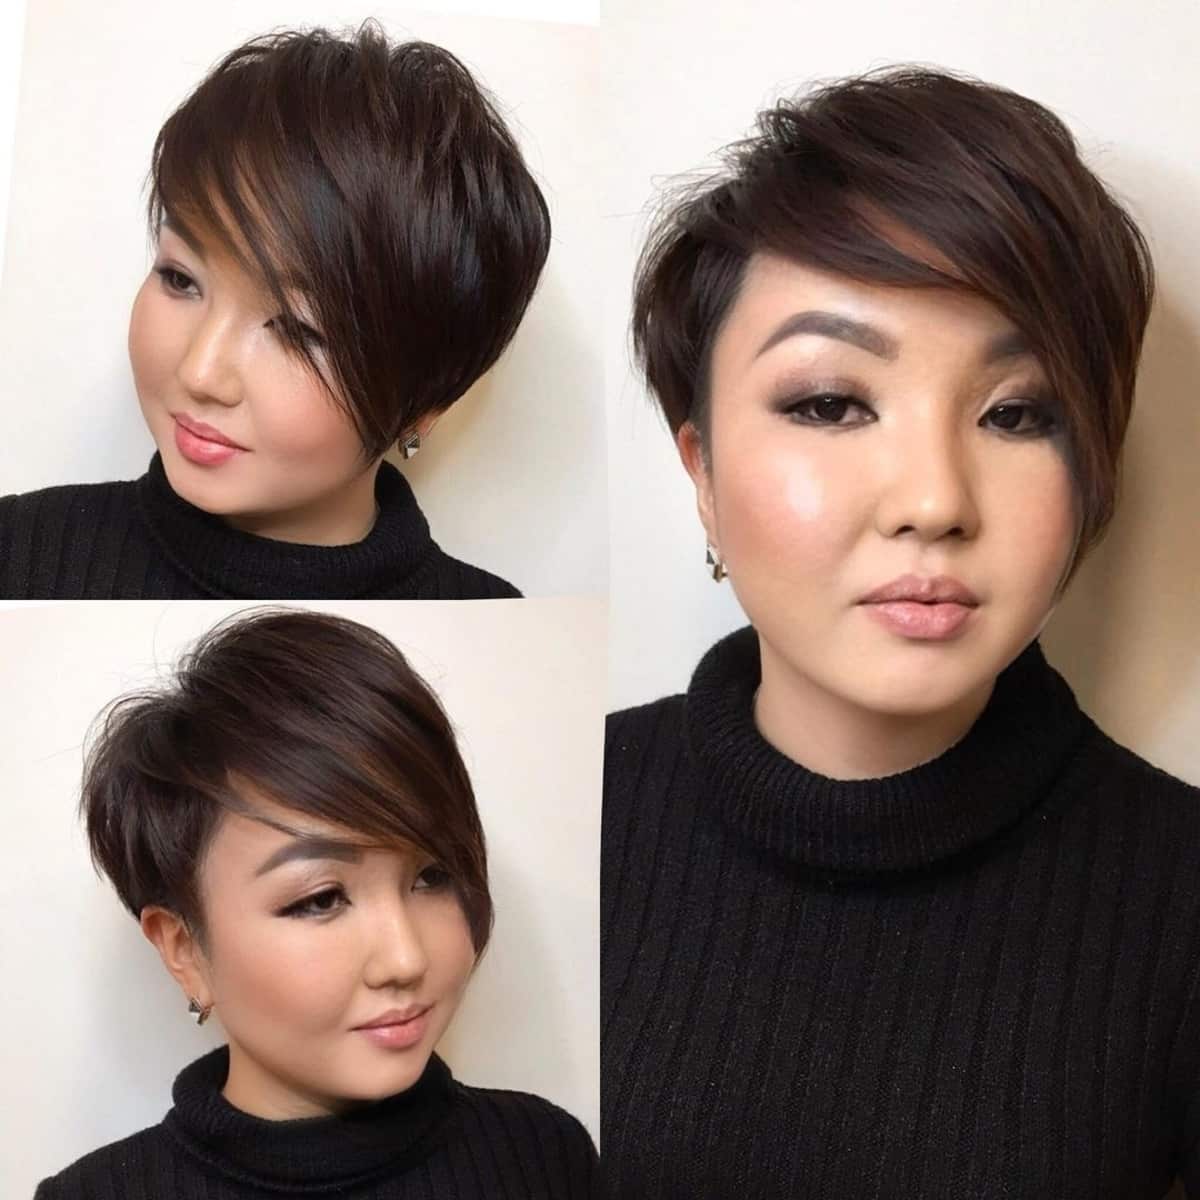 Pixie cut for asian women with round faces